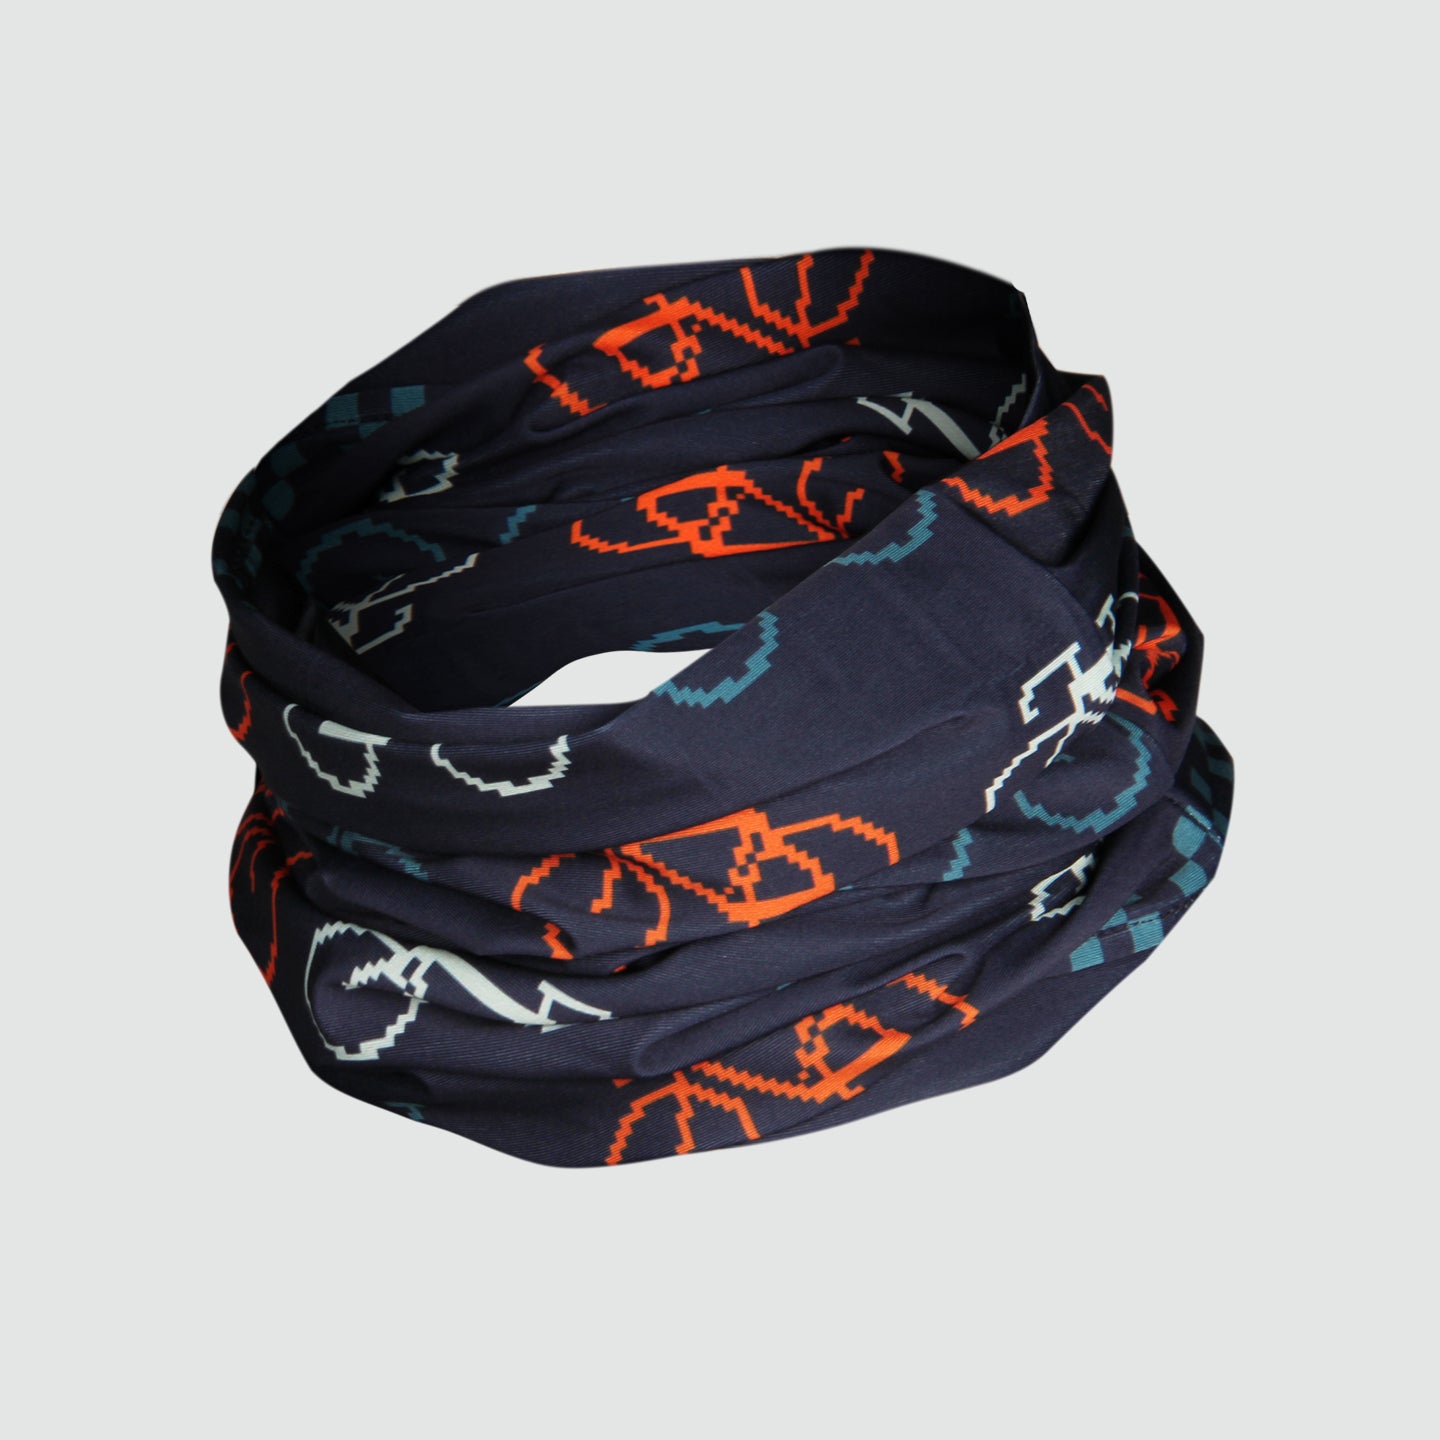 CYCLING NECK GAITER